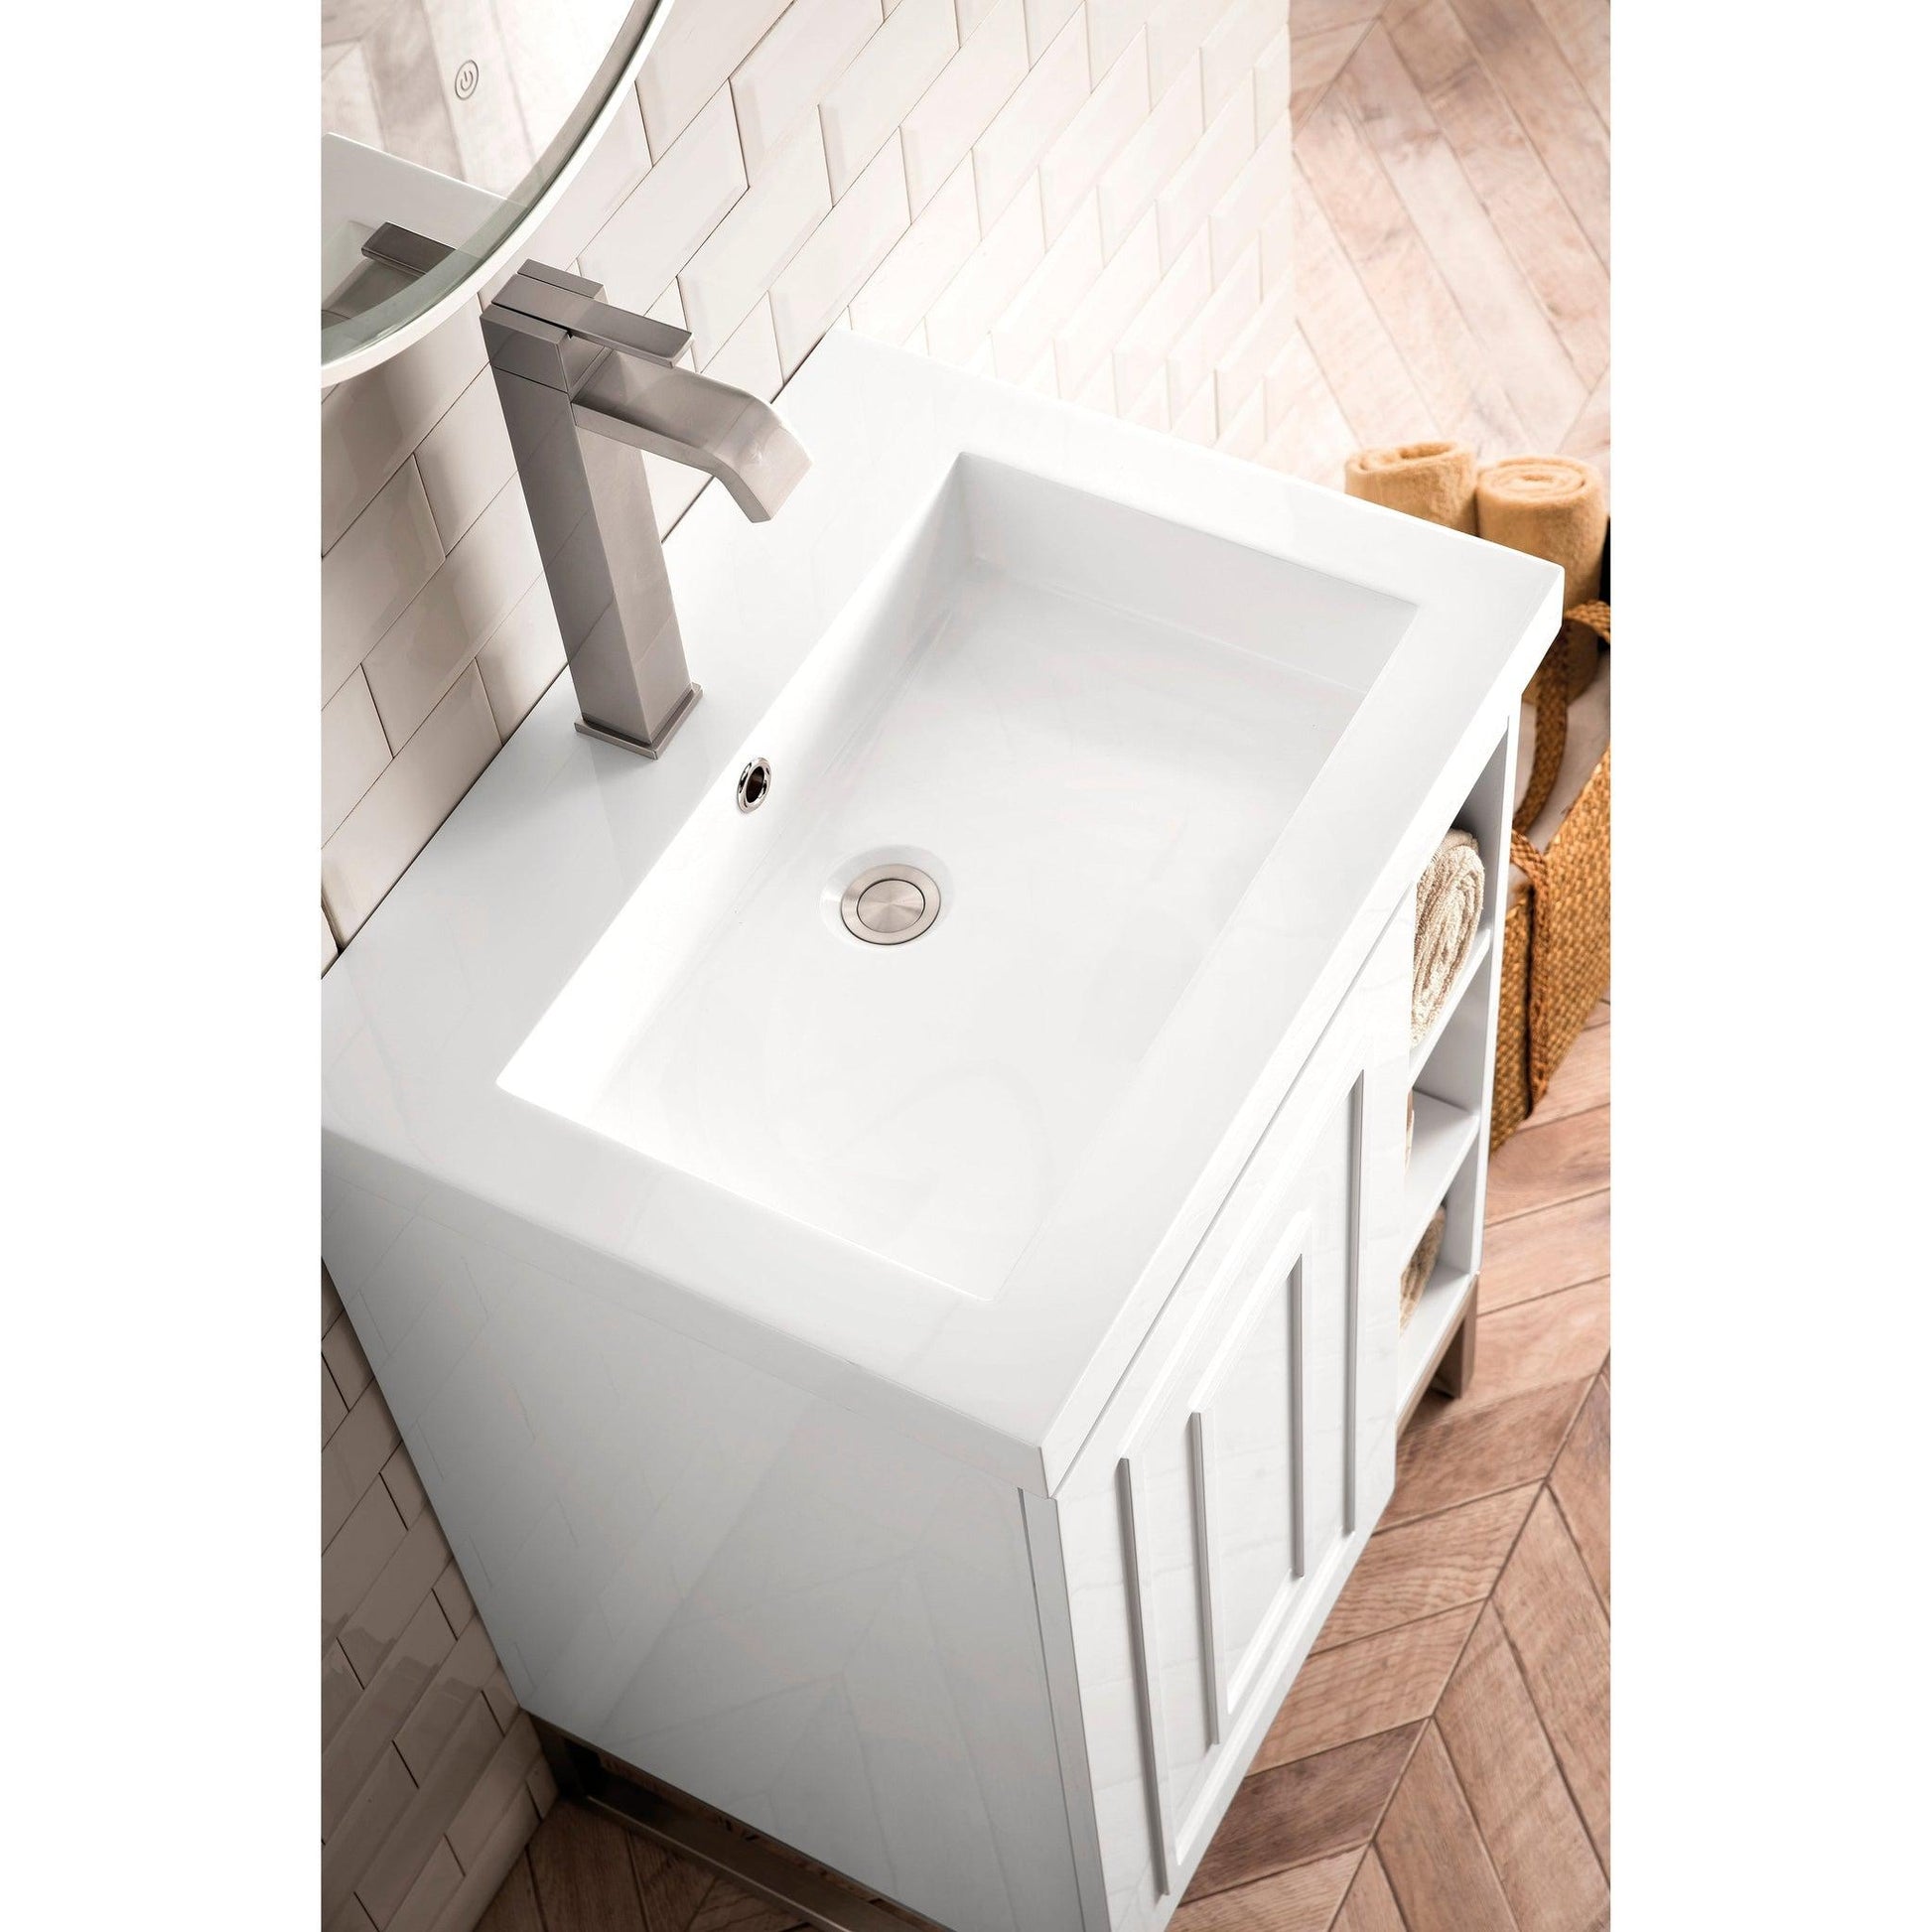 James Martin Vanities Alicante 24" Glossy White, Brushed Nickel Single Vanity Cabinet With White Glossy Composite Countertop